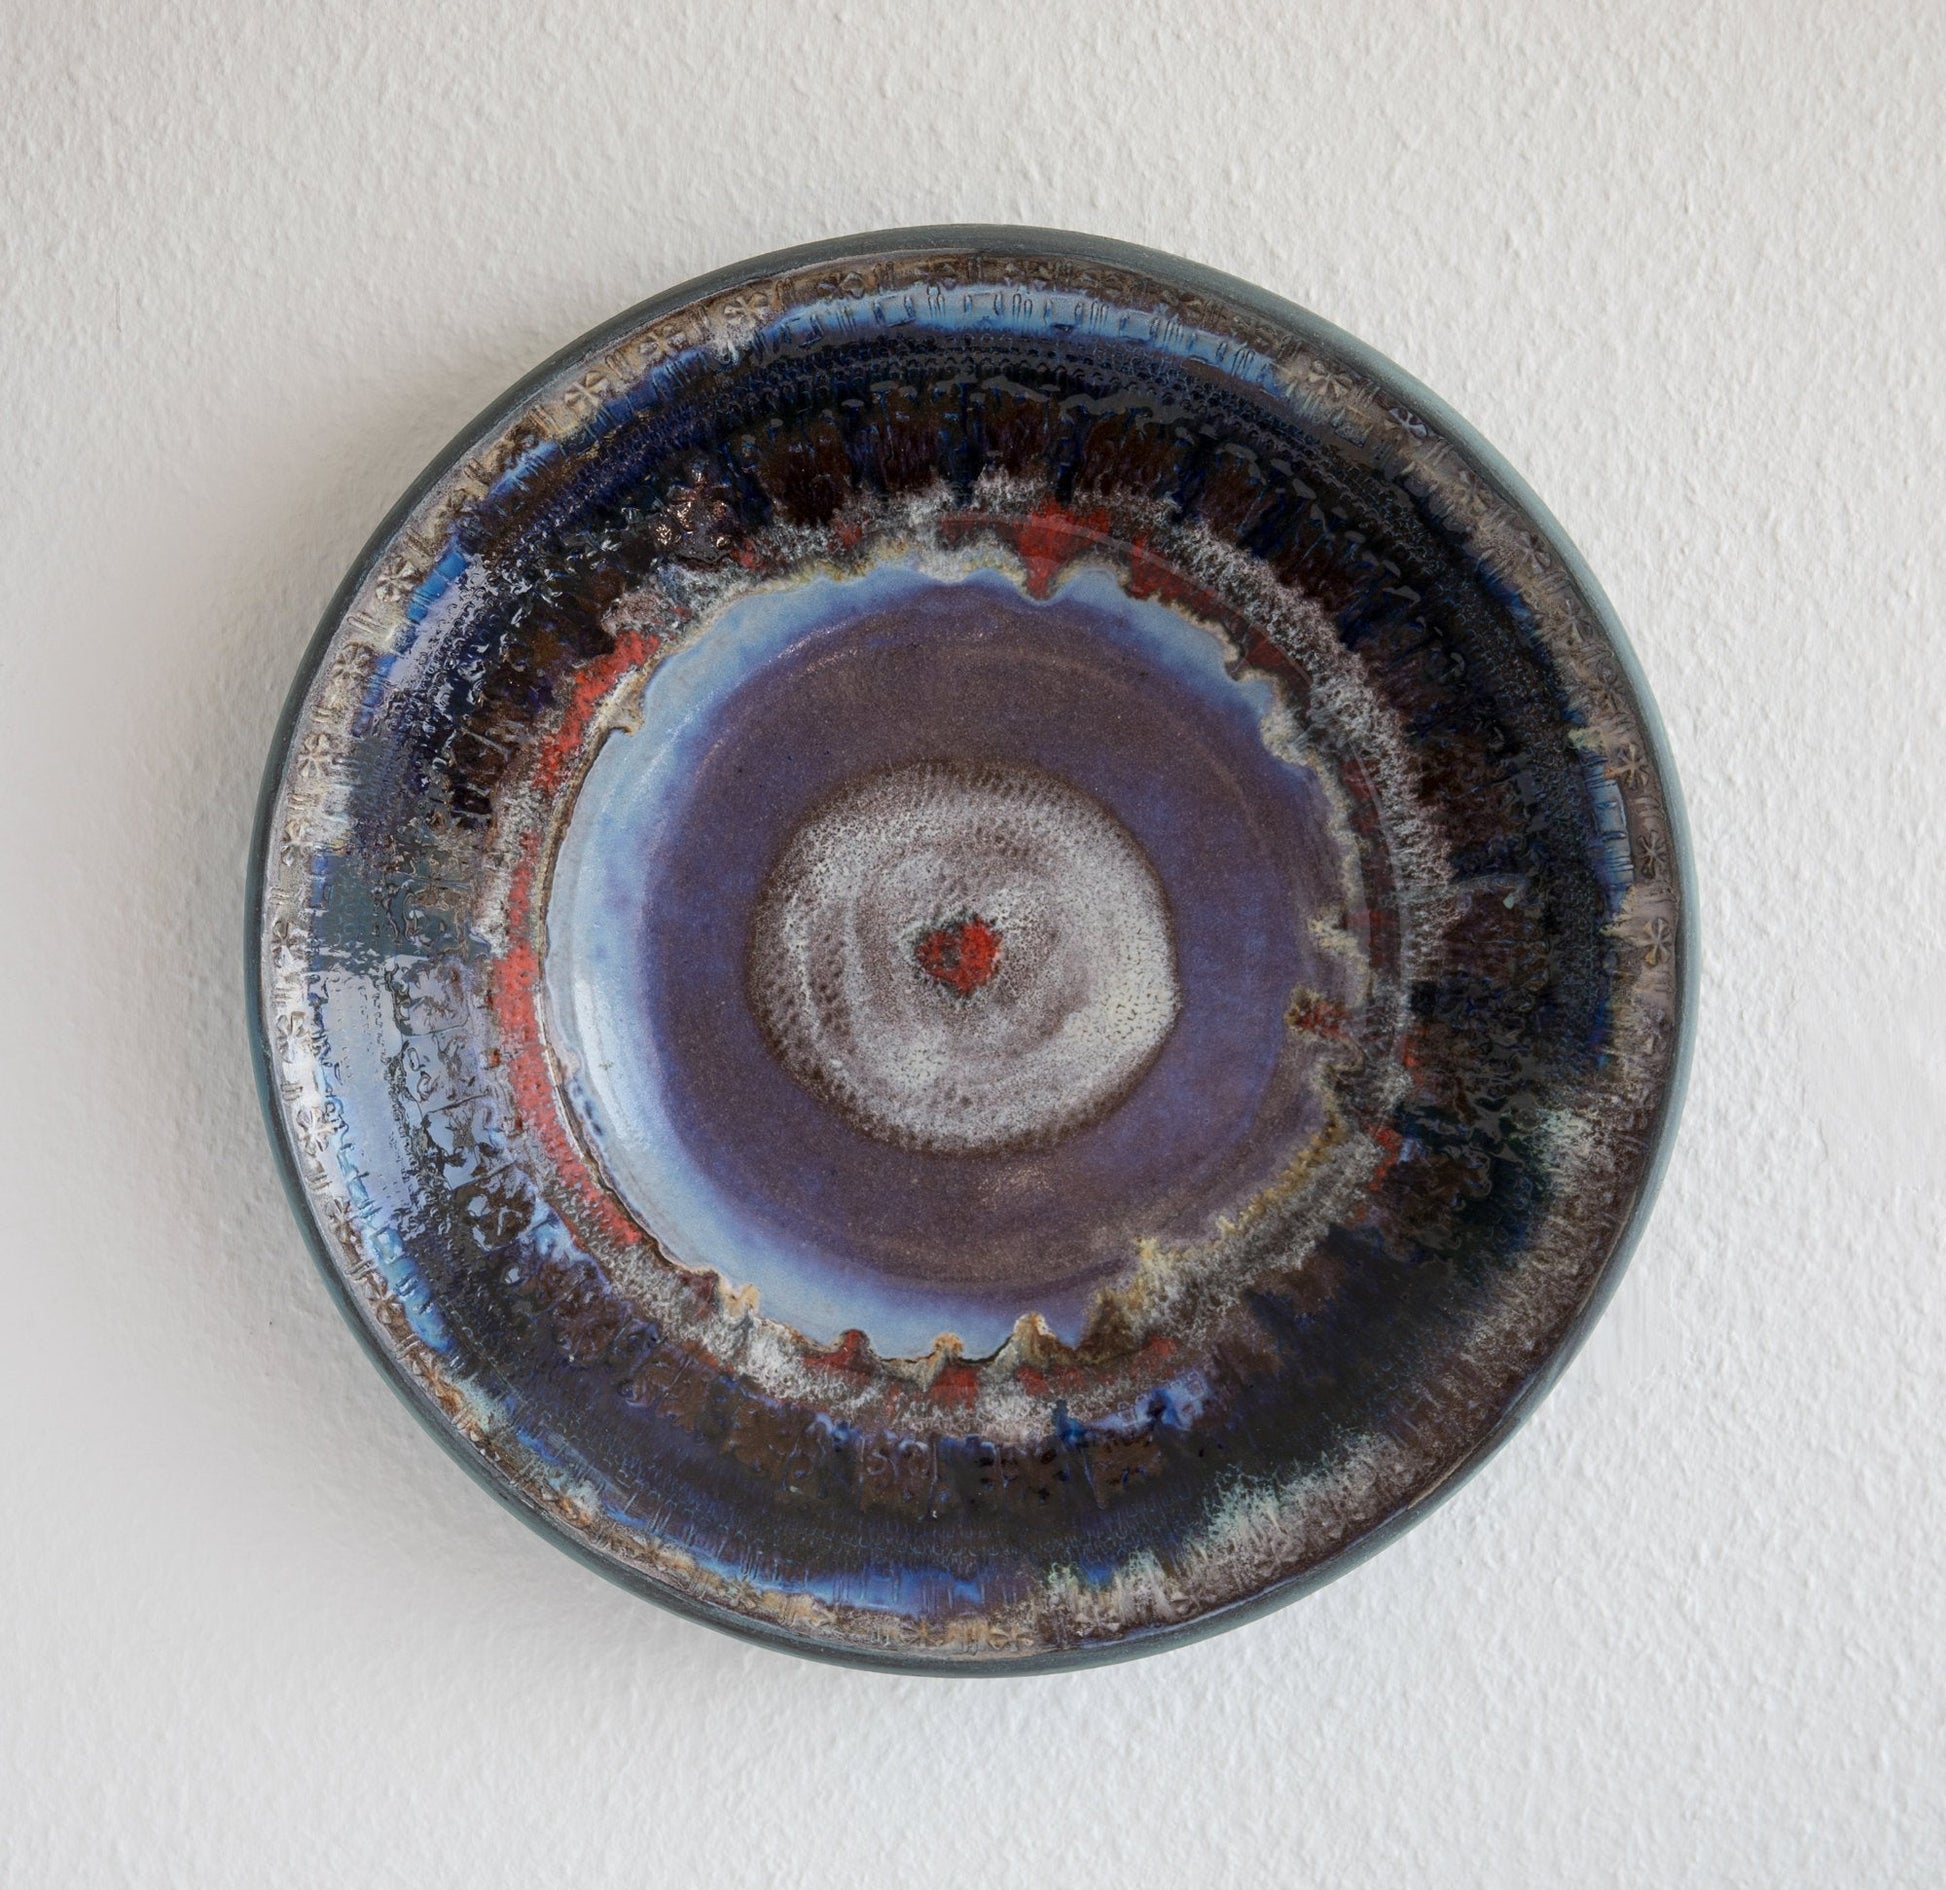 JETTE HELLERØE Monumental Abstract Sgrafitto Multi-colored Glazed Stoneware Charger Mollaris.com 